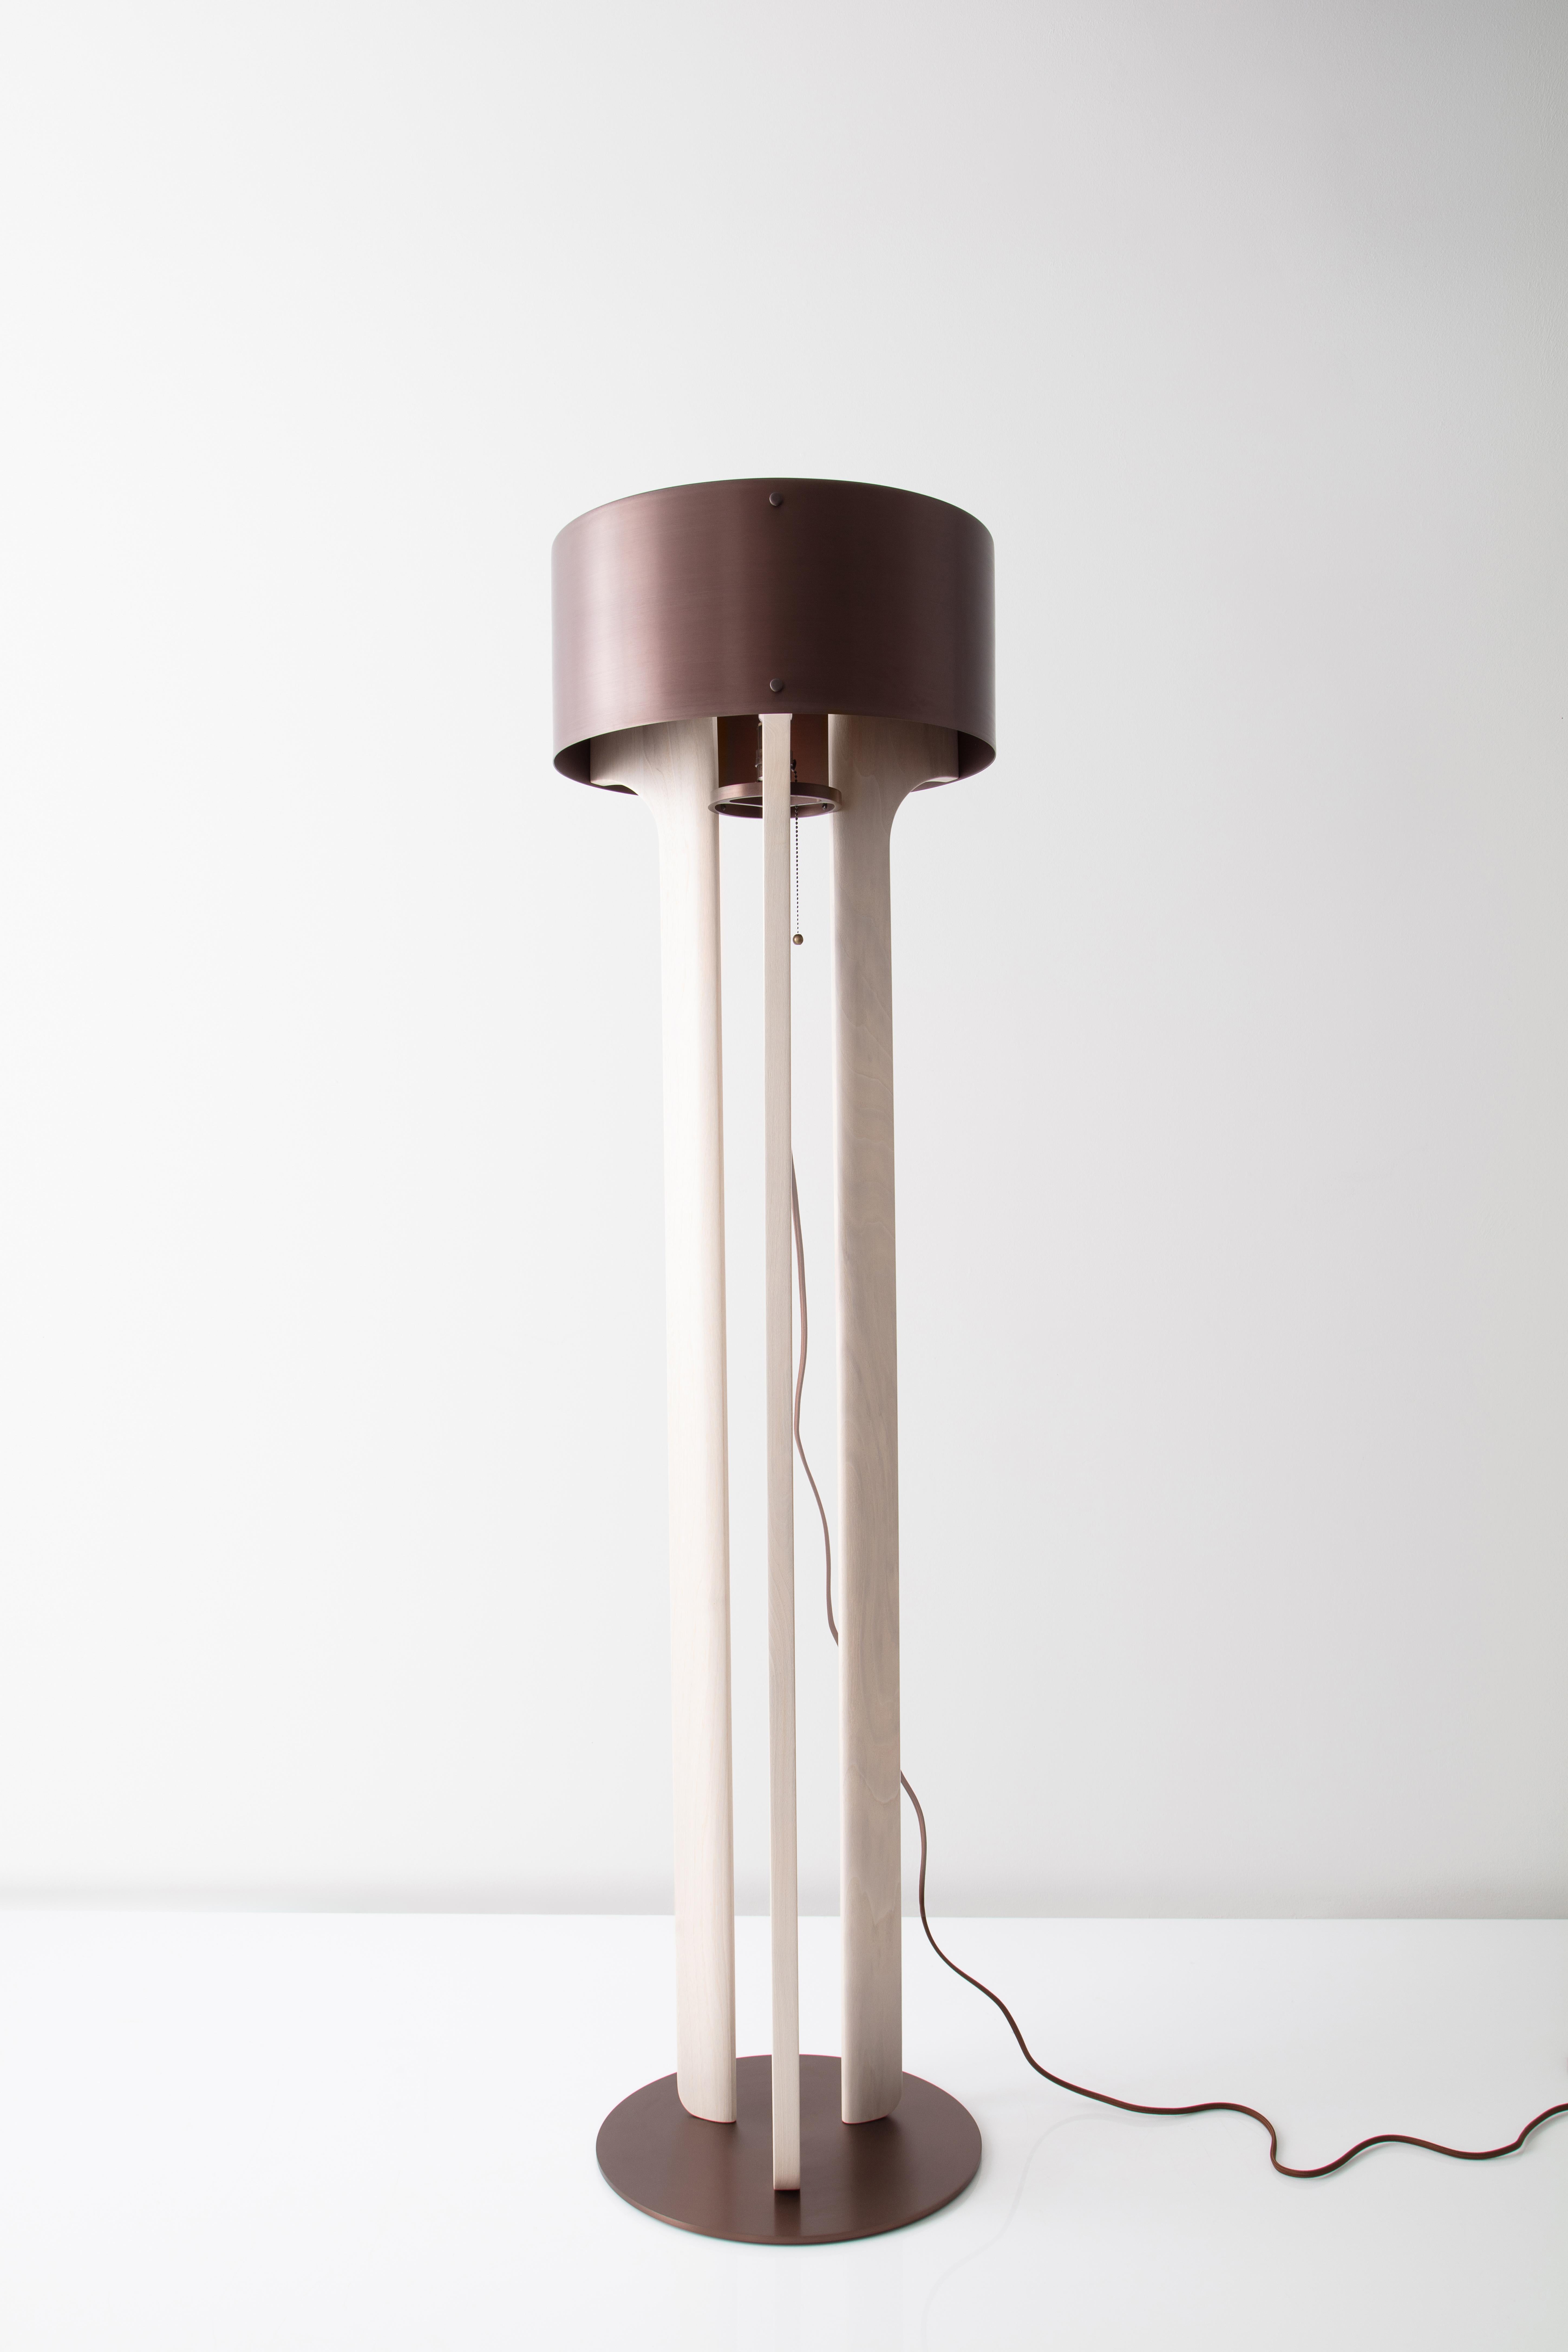 The Pommer floor lamp features a satin anodized drum shade with a trumpet-like interior. Warm white light radiates light from its core. Requisite LED bulb is supplied with the purchase of this fixture. The legs of the lamp are carved from solid wood